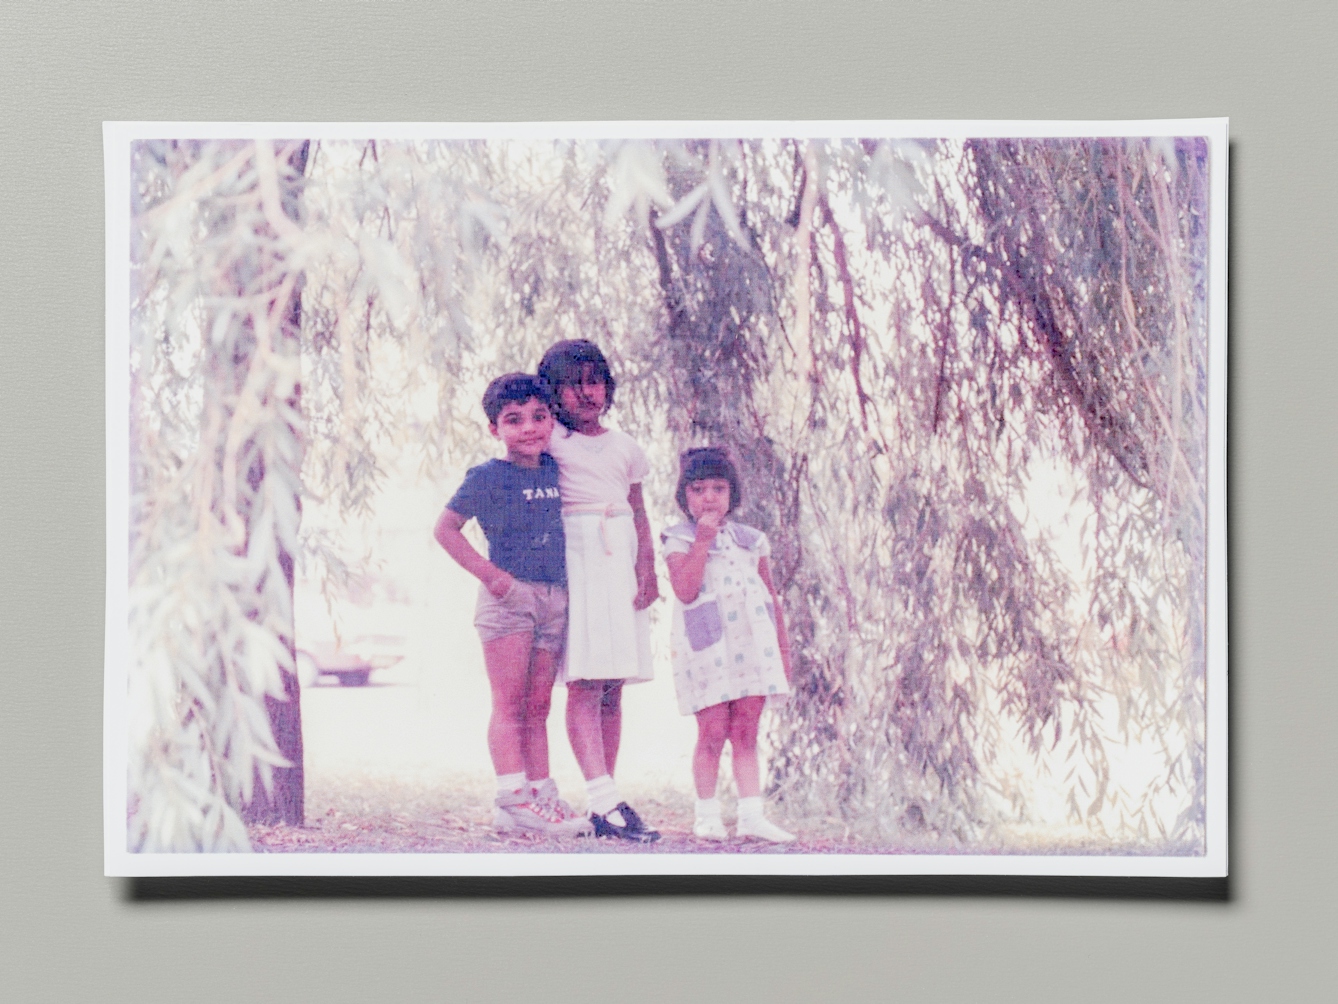 Photograph of a family photographic print resting on a grey background. The photo shows a group of three young children standing side by side under the drooping branches of a weeping willow tree. They are all looking to camera.